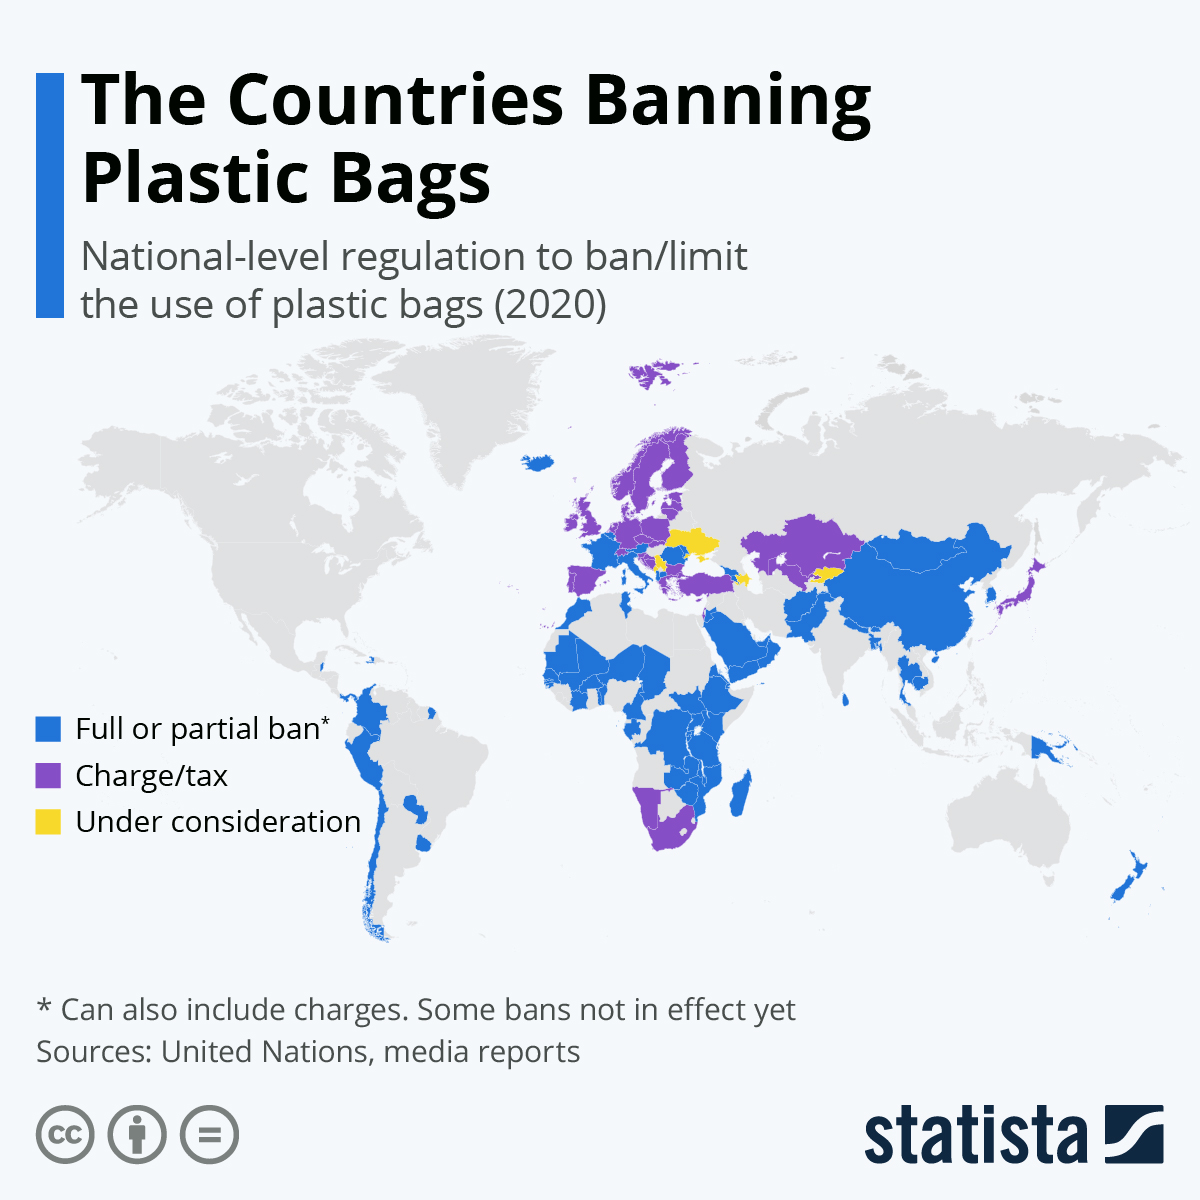 Golden tempo convenience Africa, leaders in plastic bag prohibition